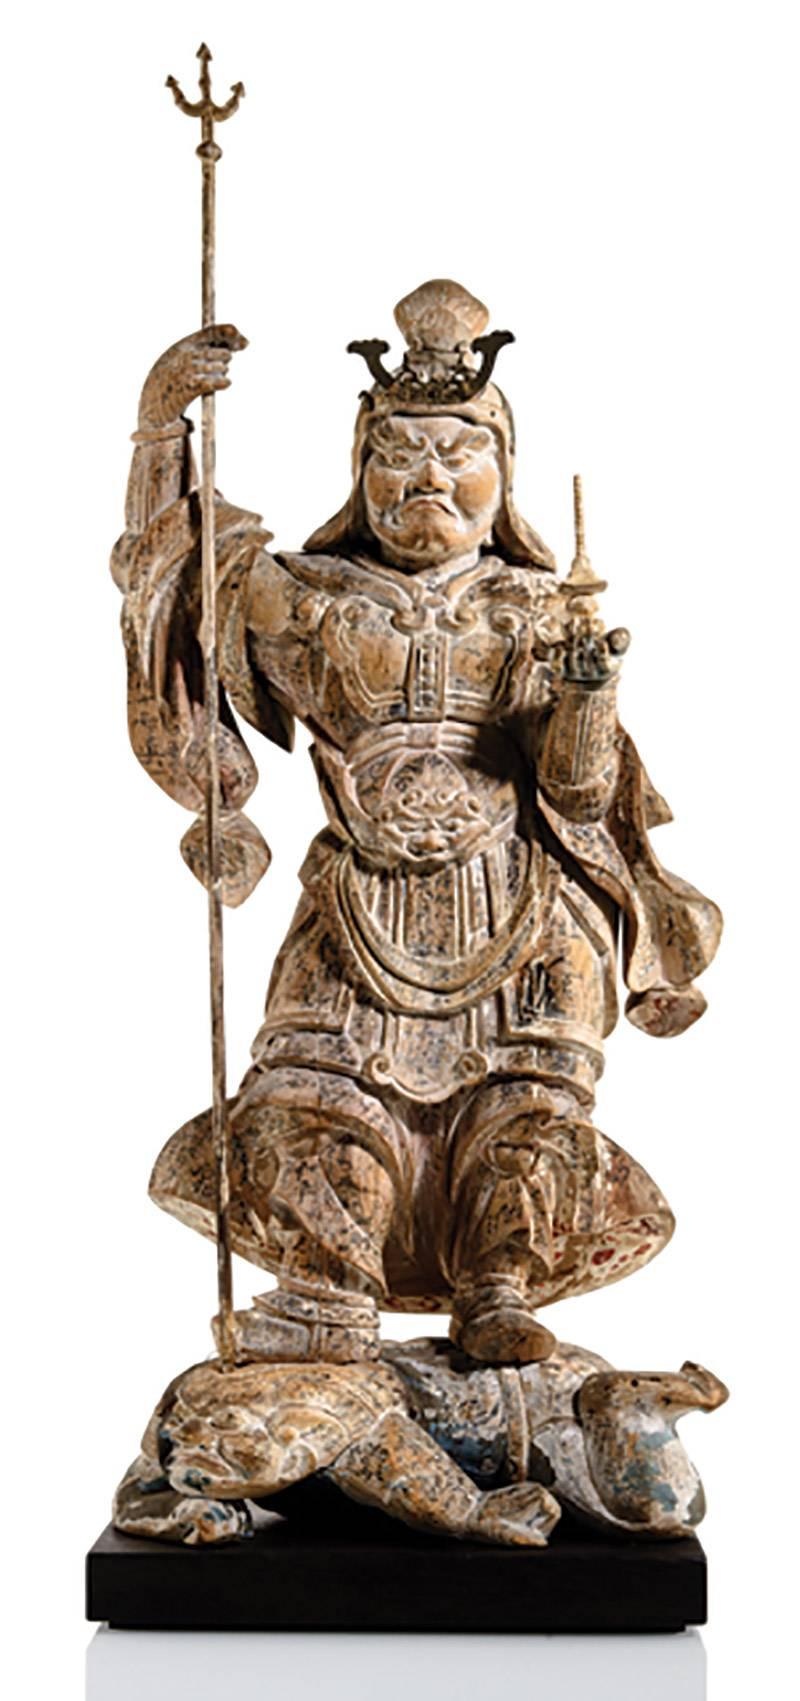 Japan,
Muromachi period
Measures: H 63.5-64.5 cm. With the spear ca. 75 cm.

Including Tamon Ten (Vaishravana) holding the spear and stupa, Jikoku Ten (Dhrtarashtra) with his left hand resting on his hip and brandishing the sword with his right